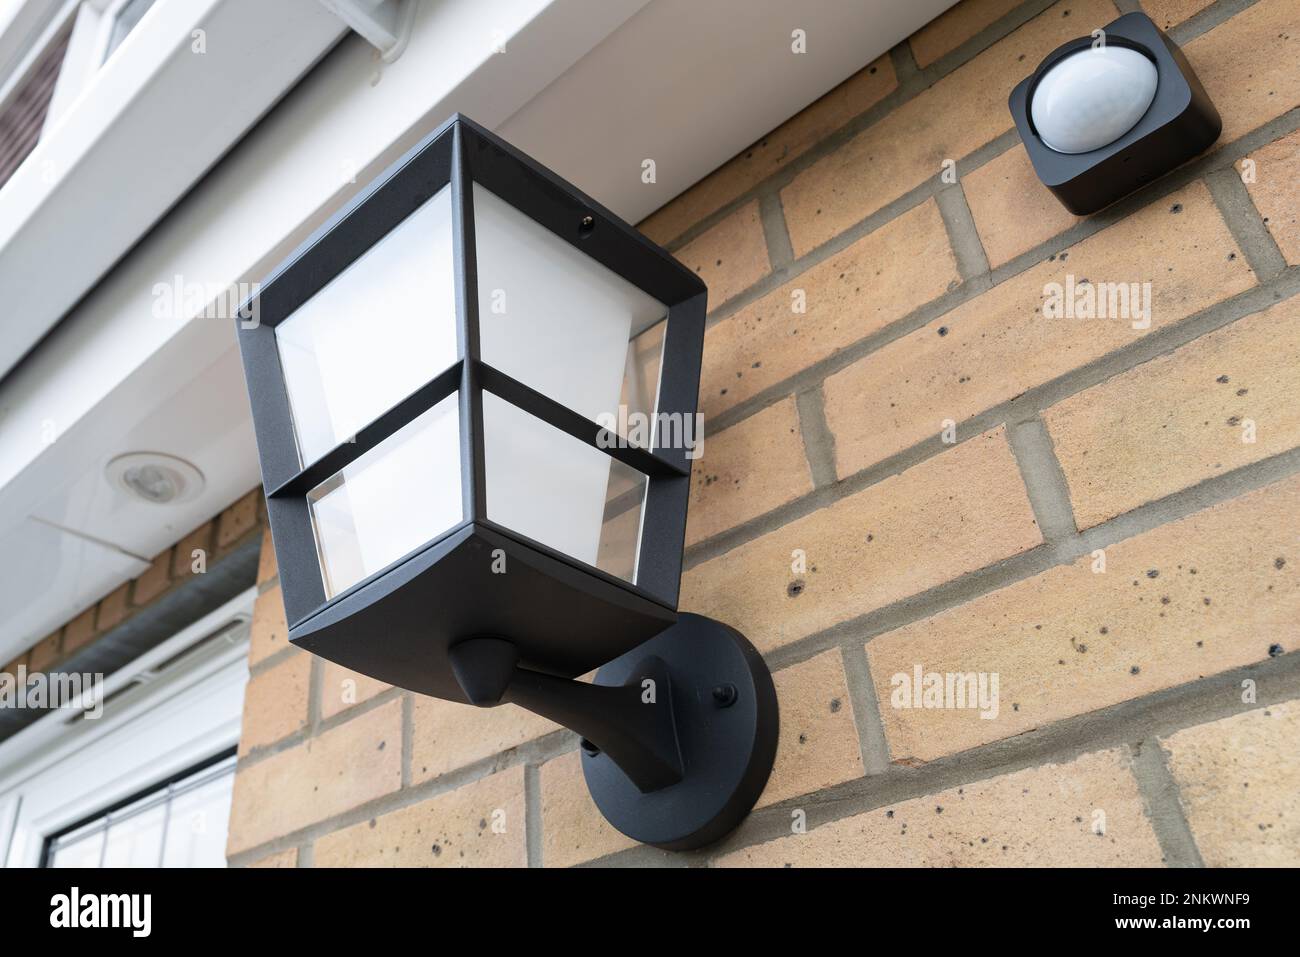 Newly installed multi-colour outdoor smart light seen together with a wireless PIR detector. Stock Photo